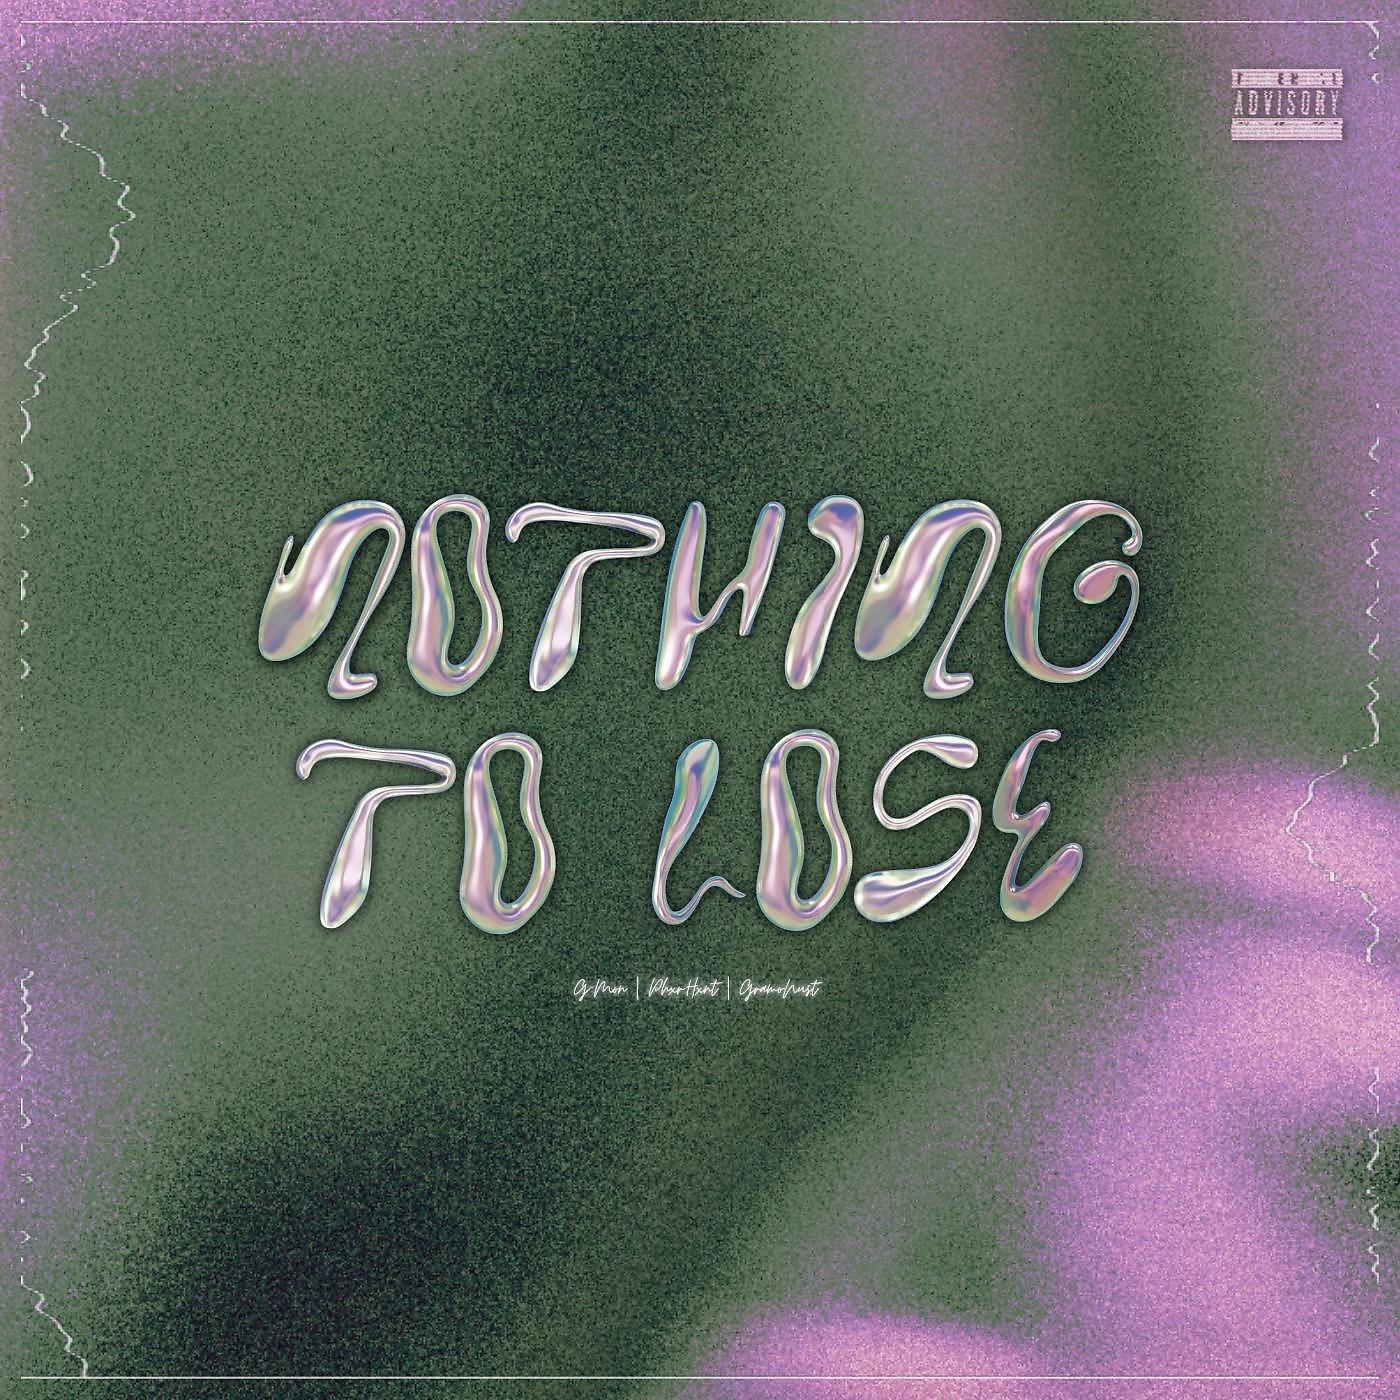 Постер альбома Nothing To Lose